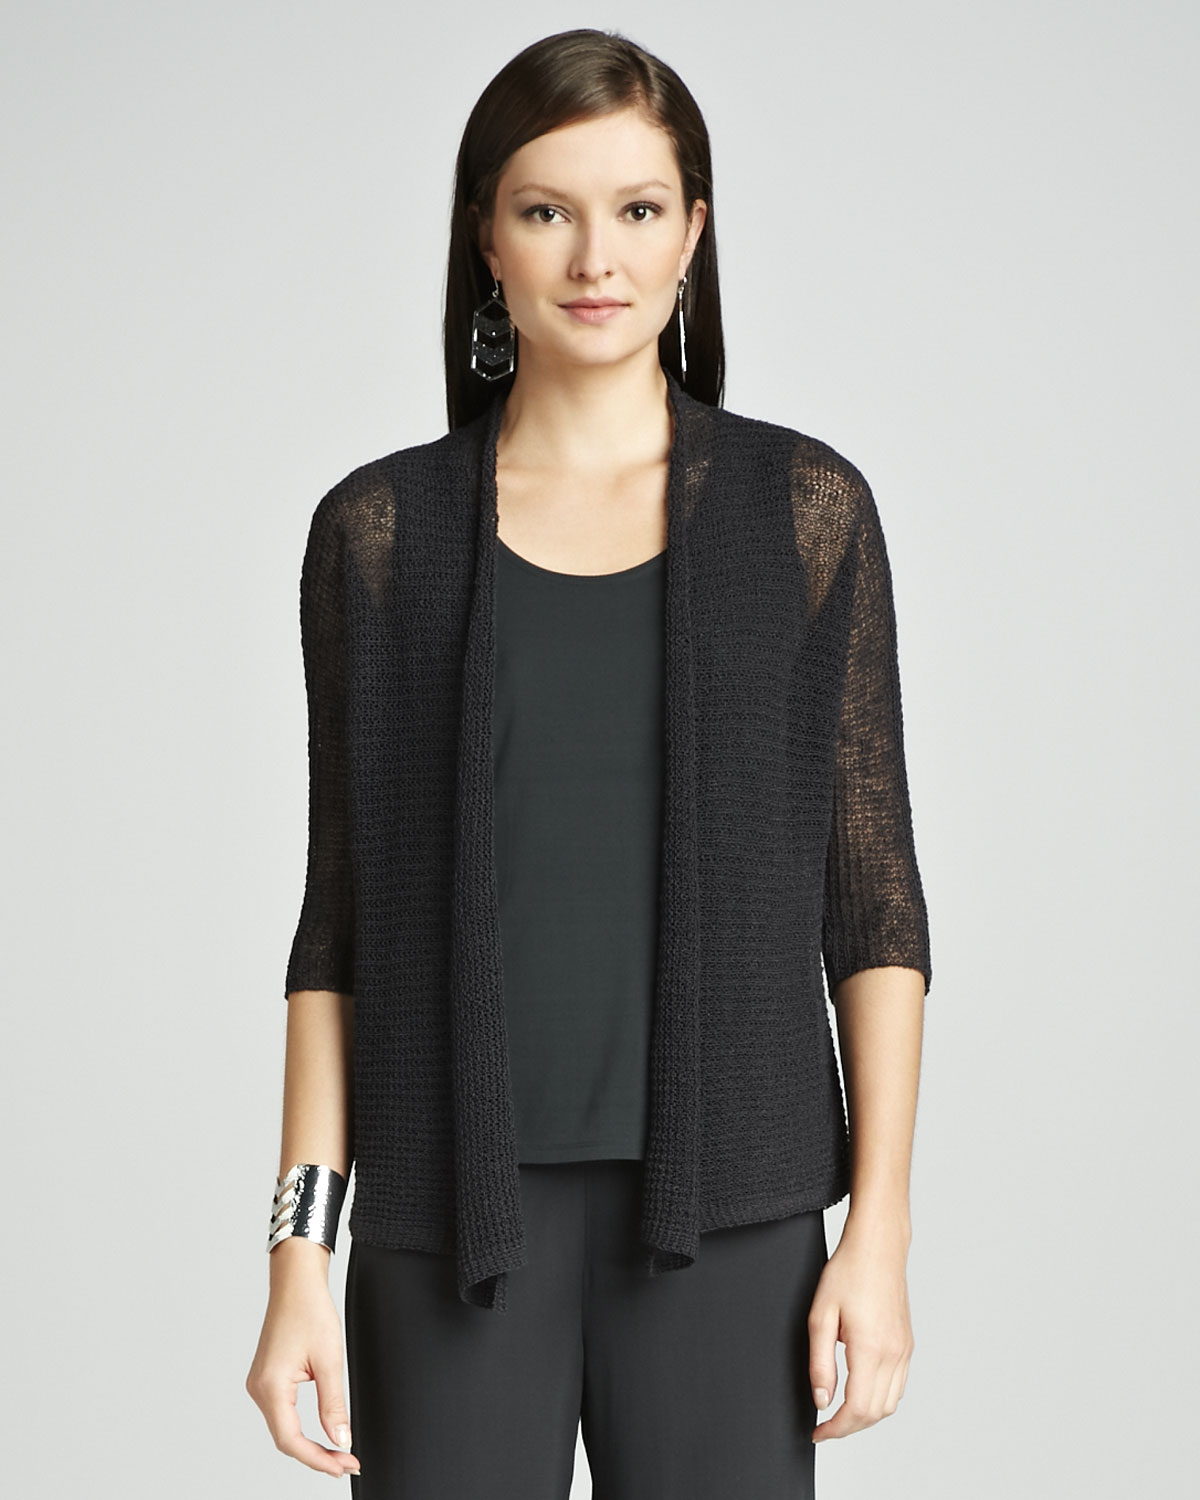 Eileen Fisher Cropped Sheer Cardigan Petite in Graphite (Black) - Lyst